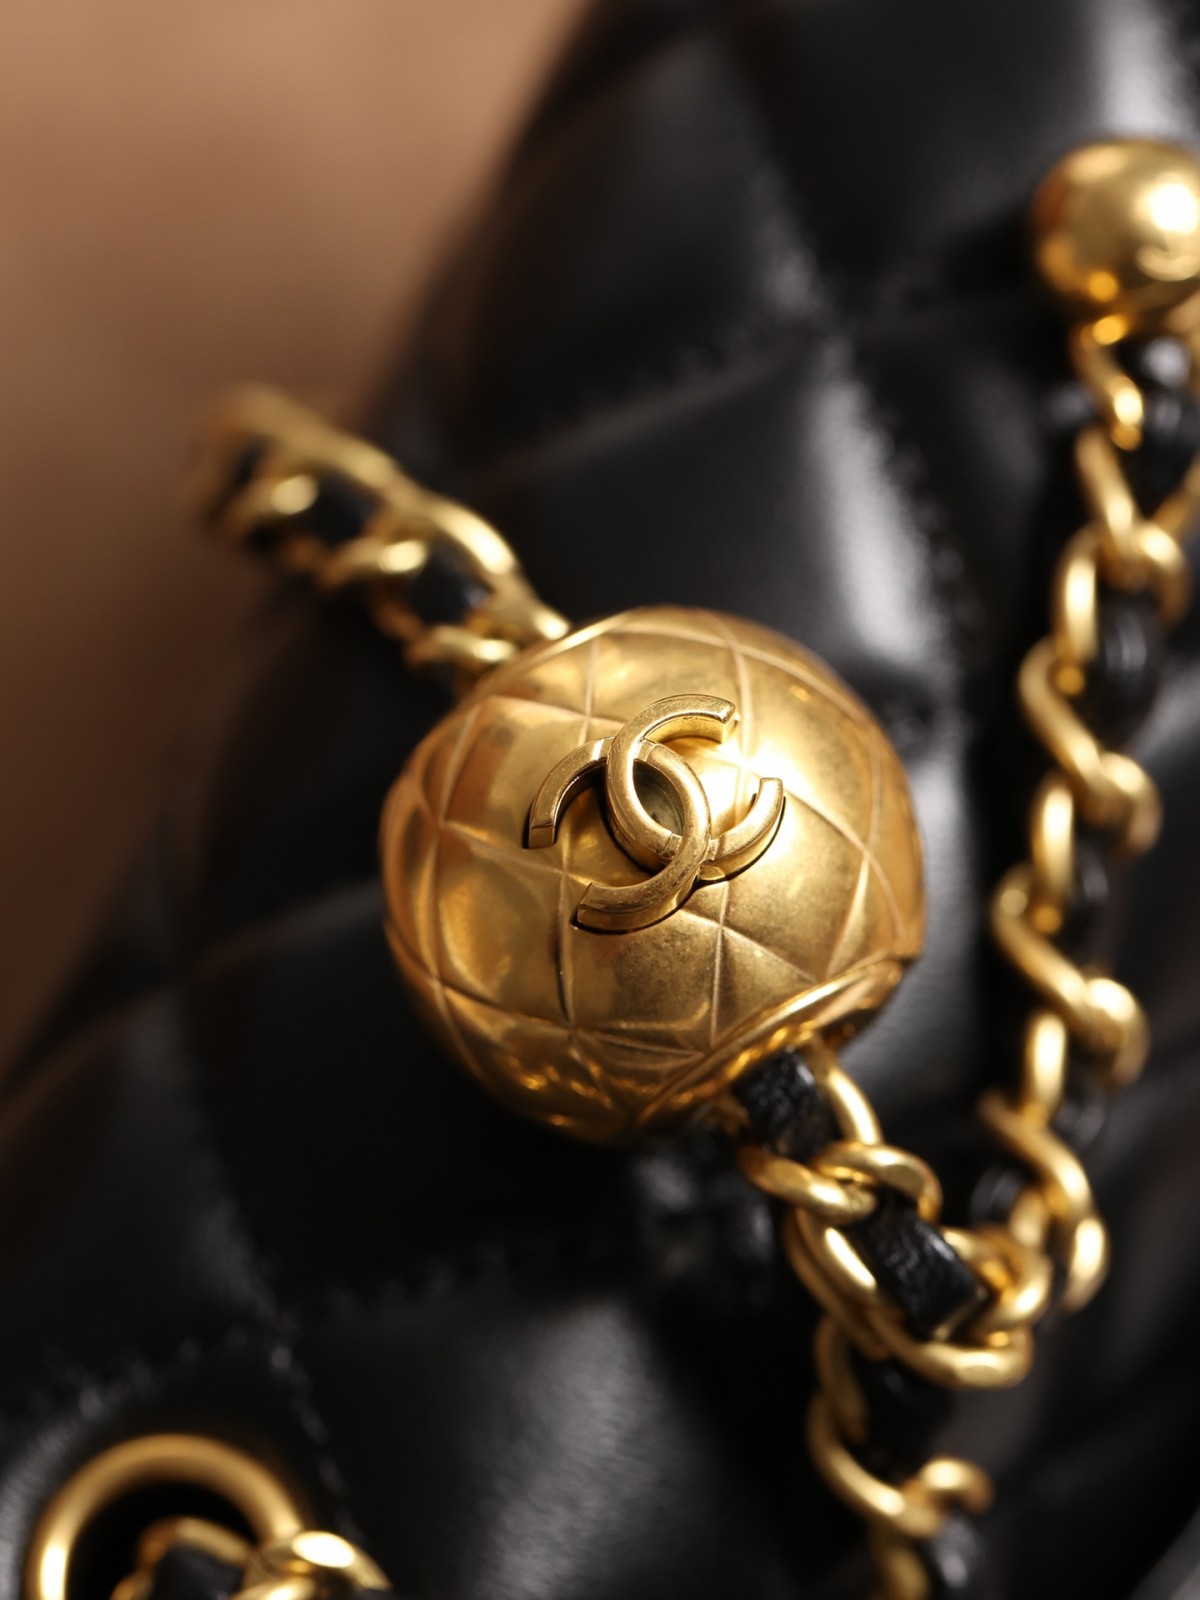 Shebag is serious to the Mini Classic flap bag with gold ball this time！（2024 Week 3）-最高品質の偽のルイヴィトンバッグオンラインストア、レプリカデザイナーバッグru